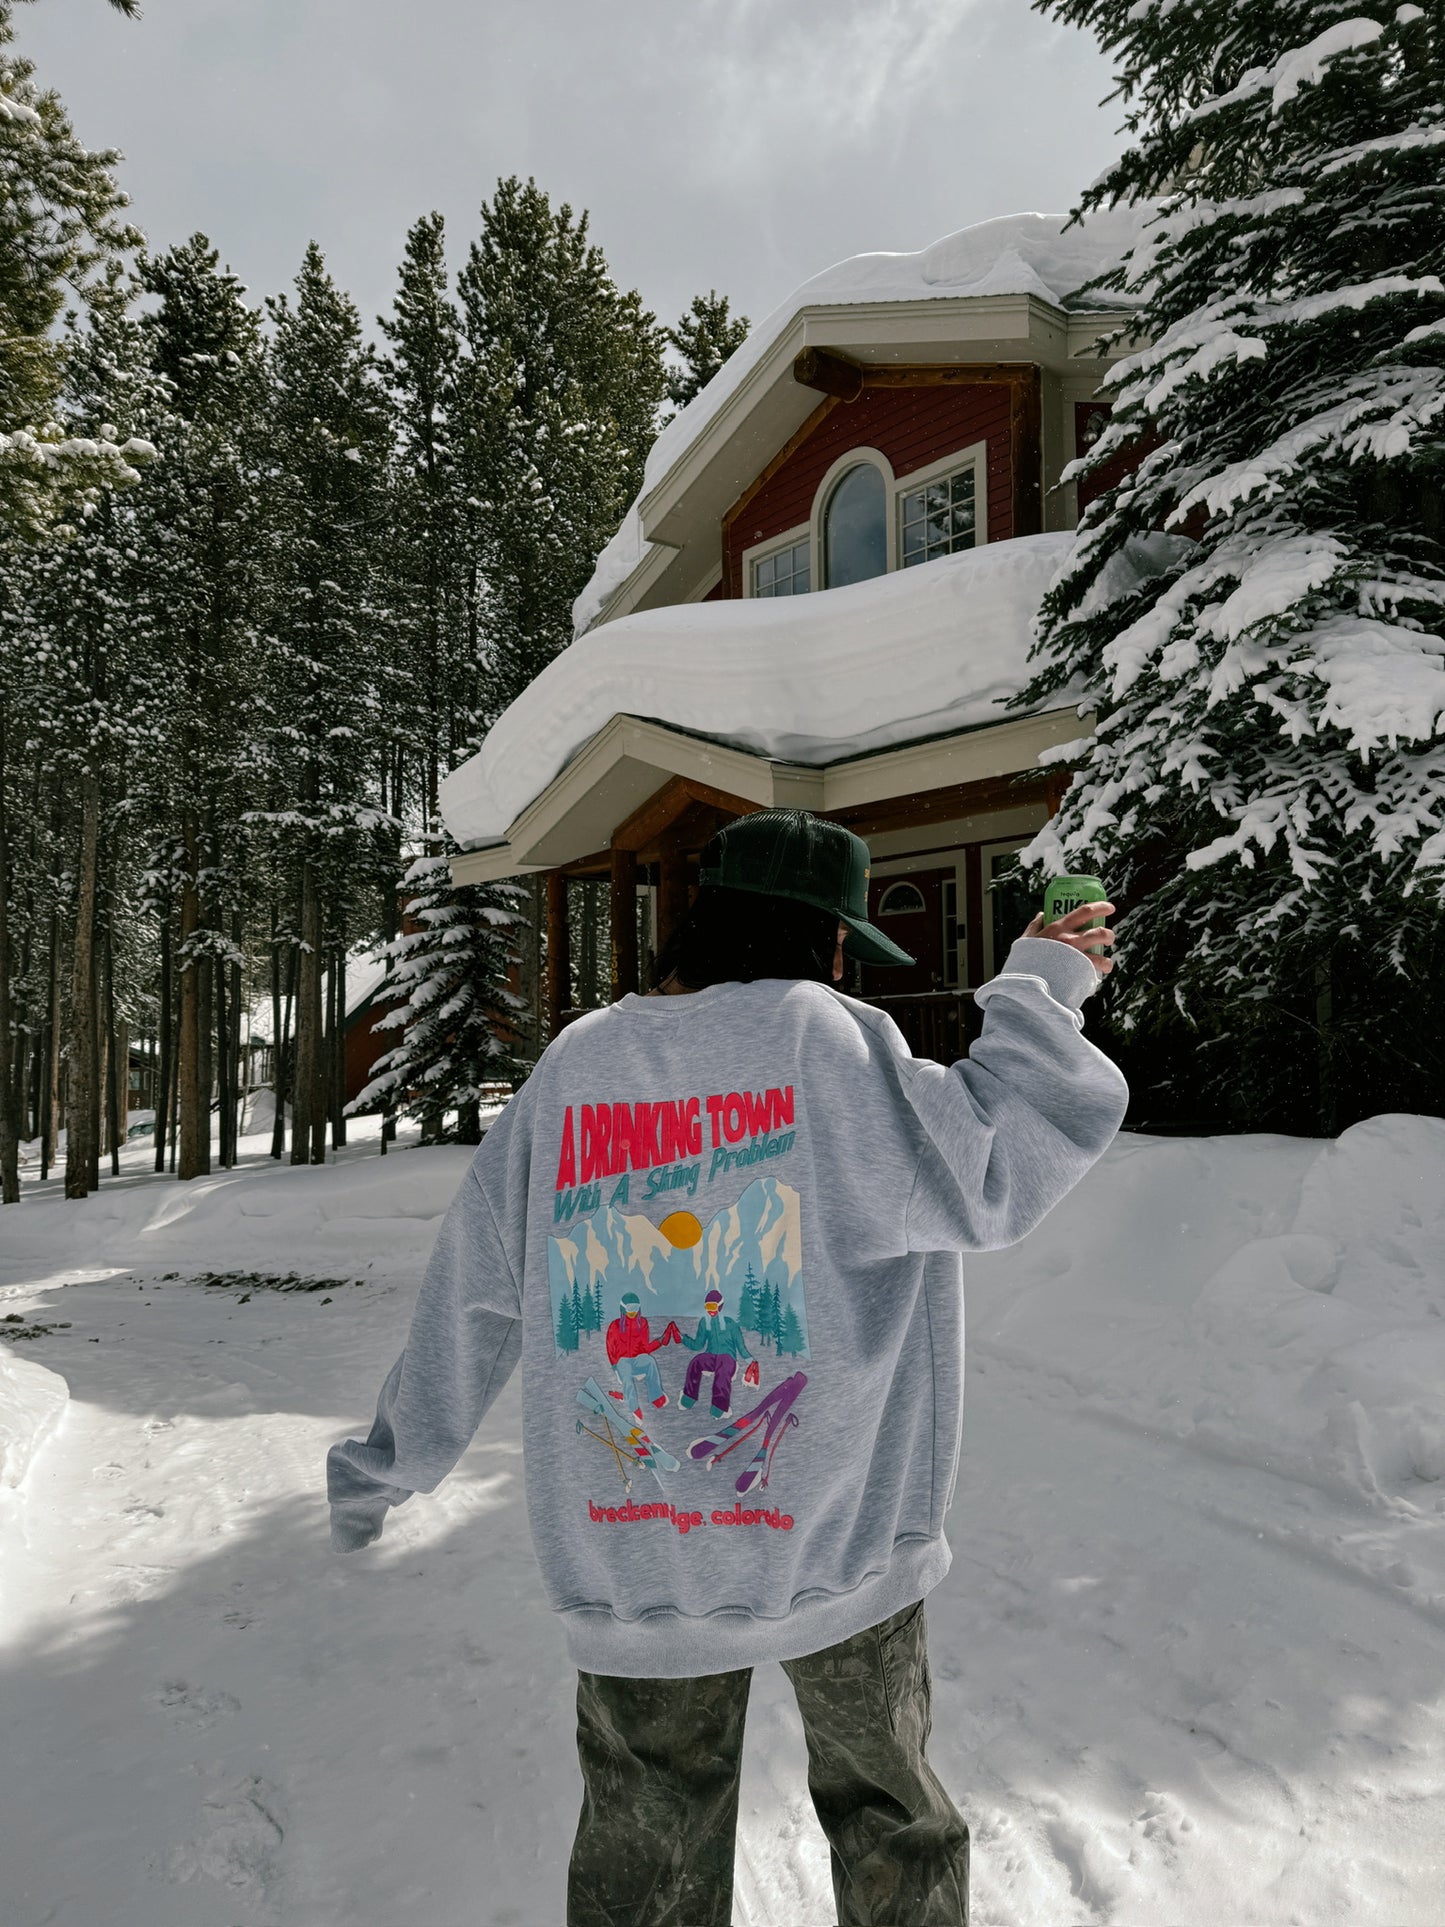 “A Drinking Town With A Skiing Problem” Crewneck